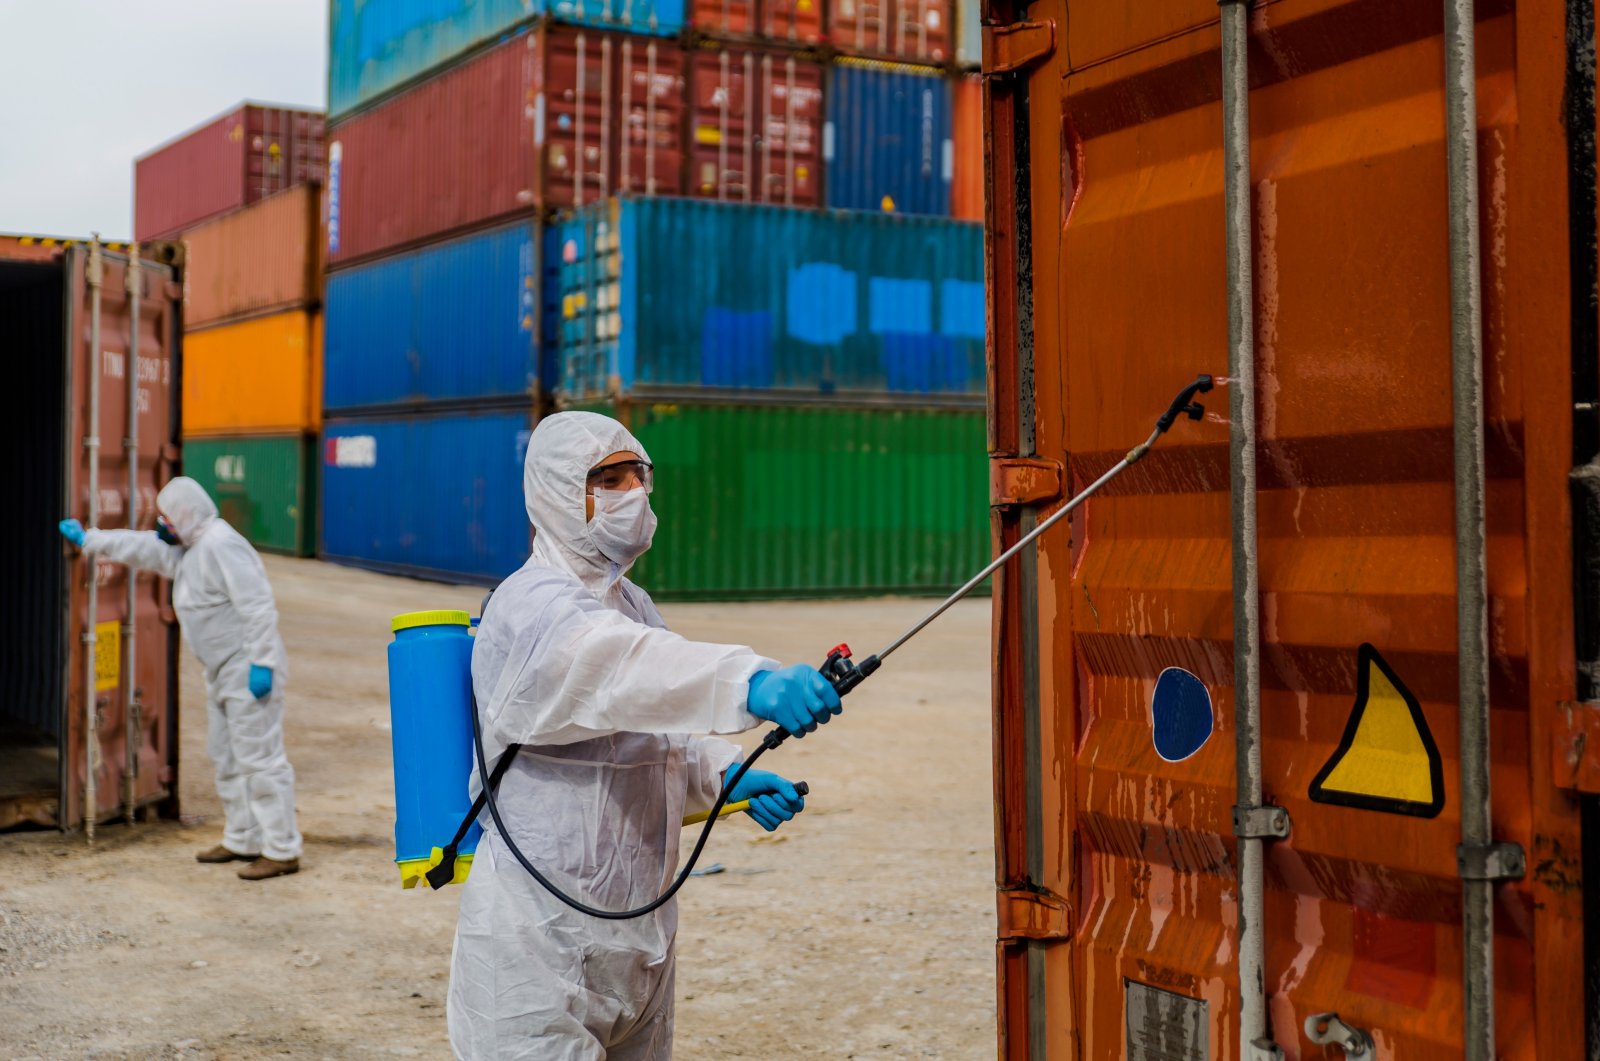 A man wearing a protective biological suit and mask as protection against the coronavirus disinfects containers in a port in Haydarpaşa, Üsküdar district, Istanbul, Turkey, March 28, 2020. (Photo by iStock)